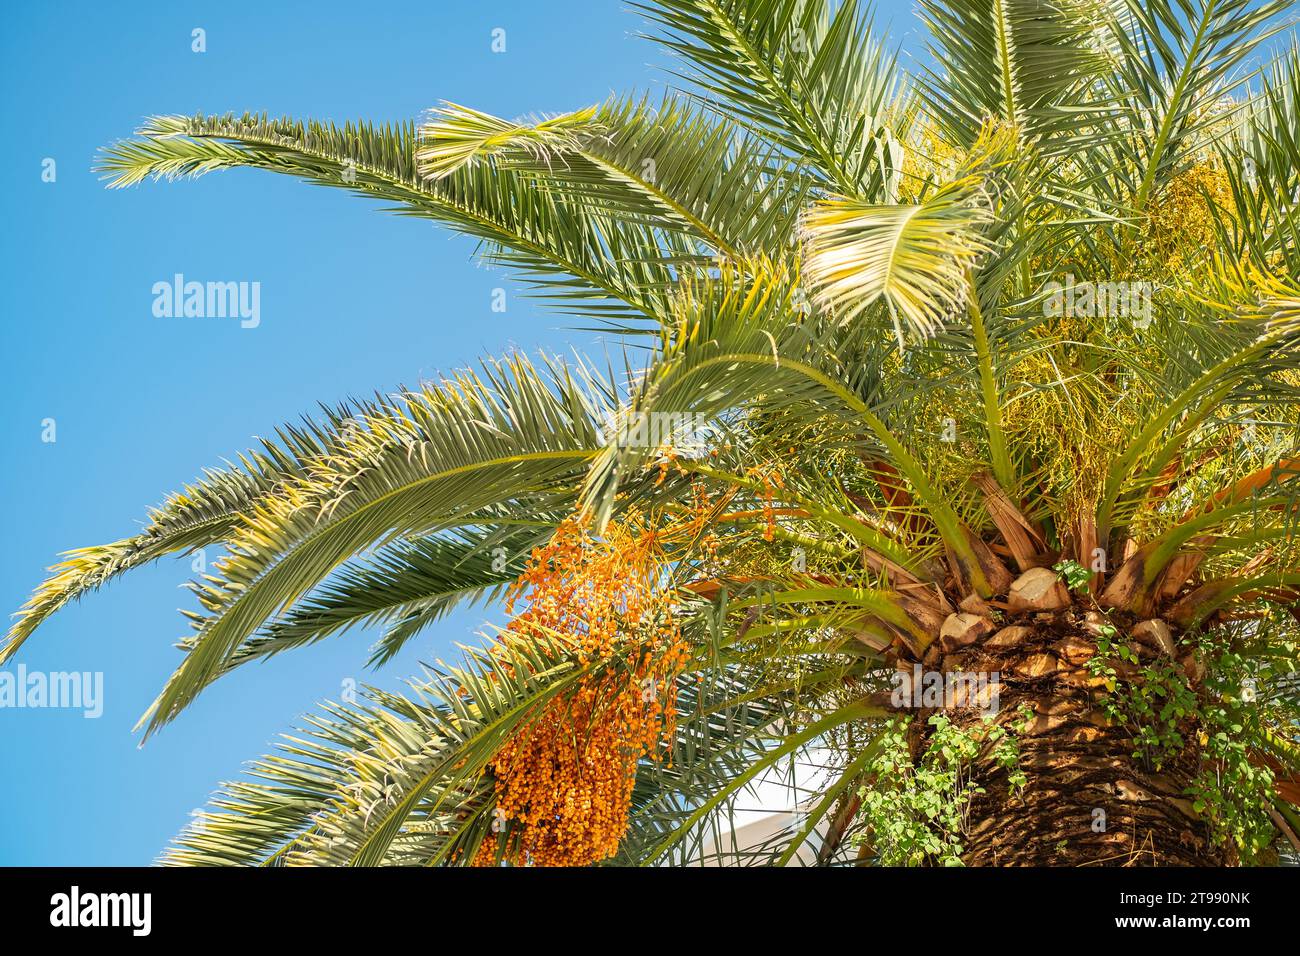 Palm tree with green leaves and growing dates on them. Beautiful palms with dates on blue sky background. View of palm tree, stem and branches, leaves Stock Photo